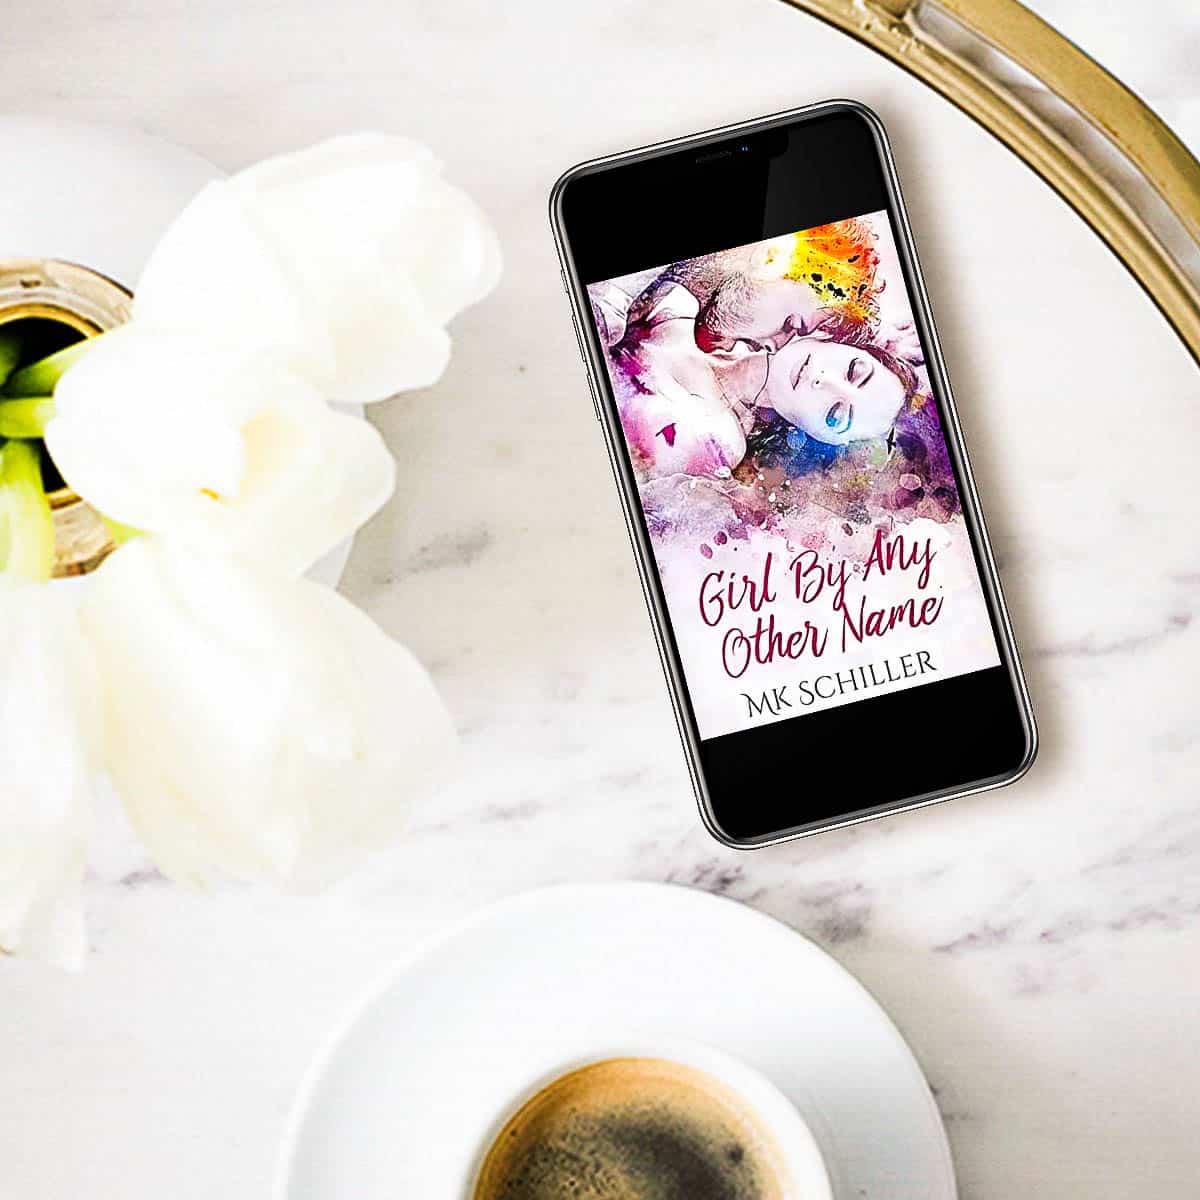 Girl By Any Other Name by MK Schiller was an unexpected find back in 2014 and now it has been re-released with a new cover! A suspenseful, yet charming romance.